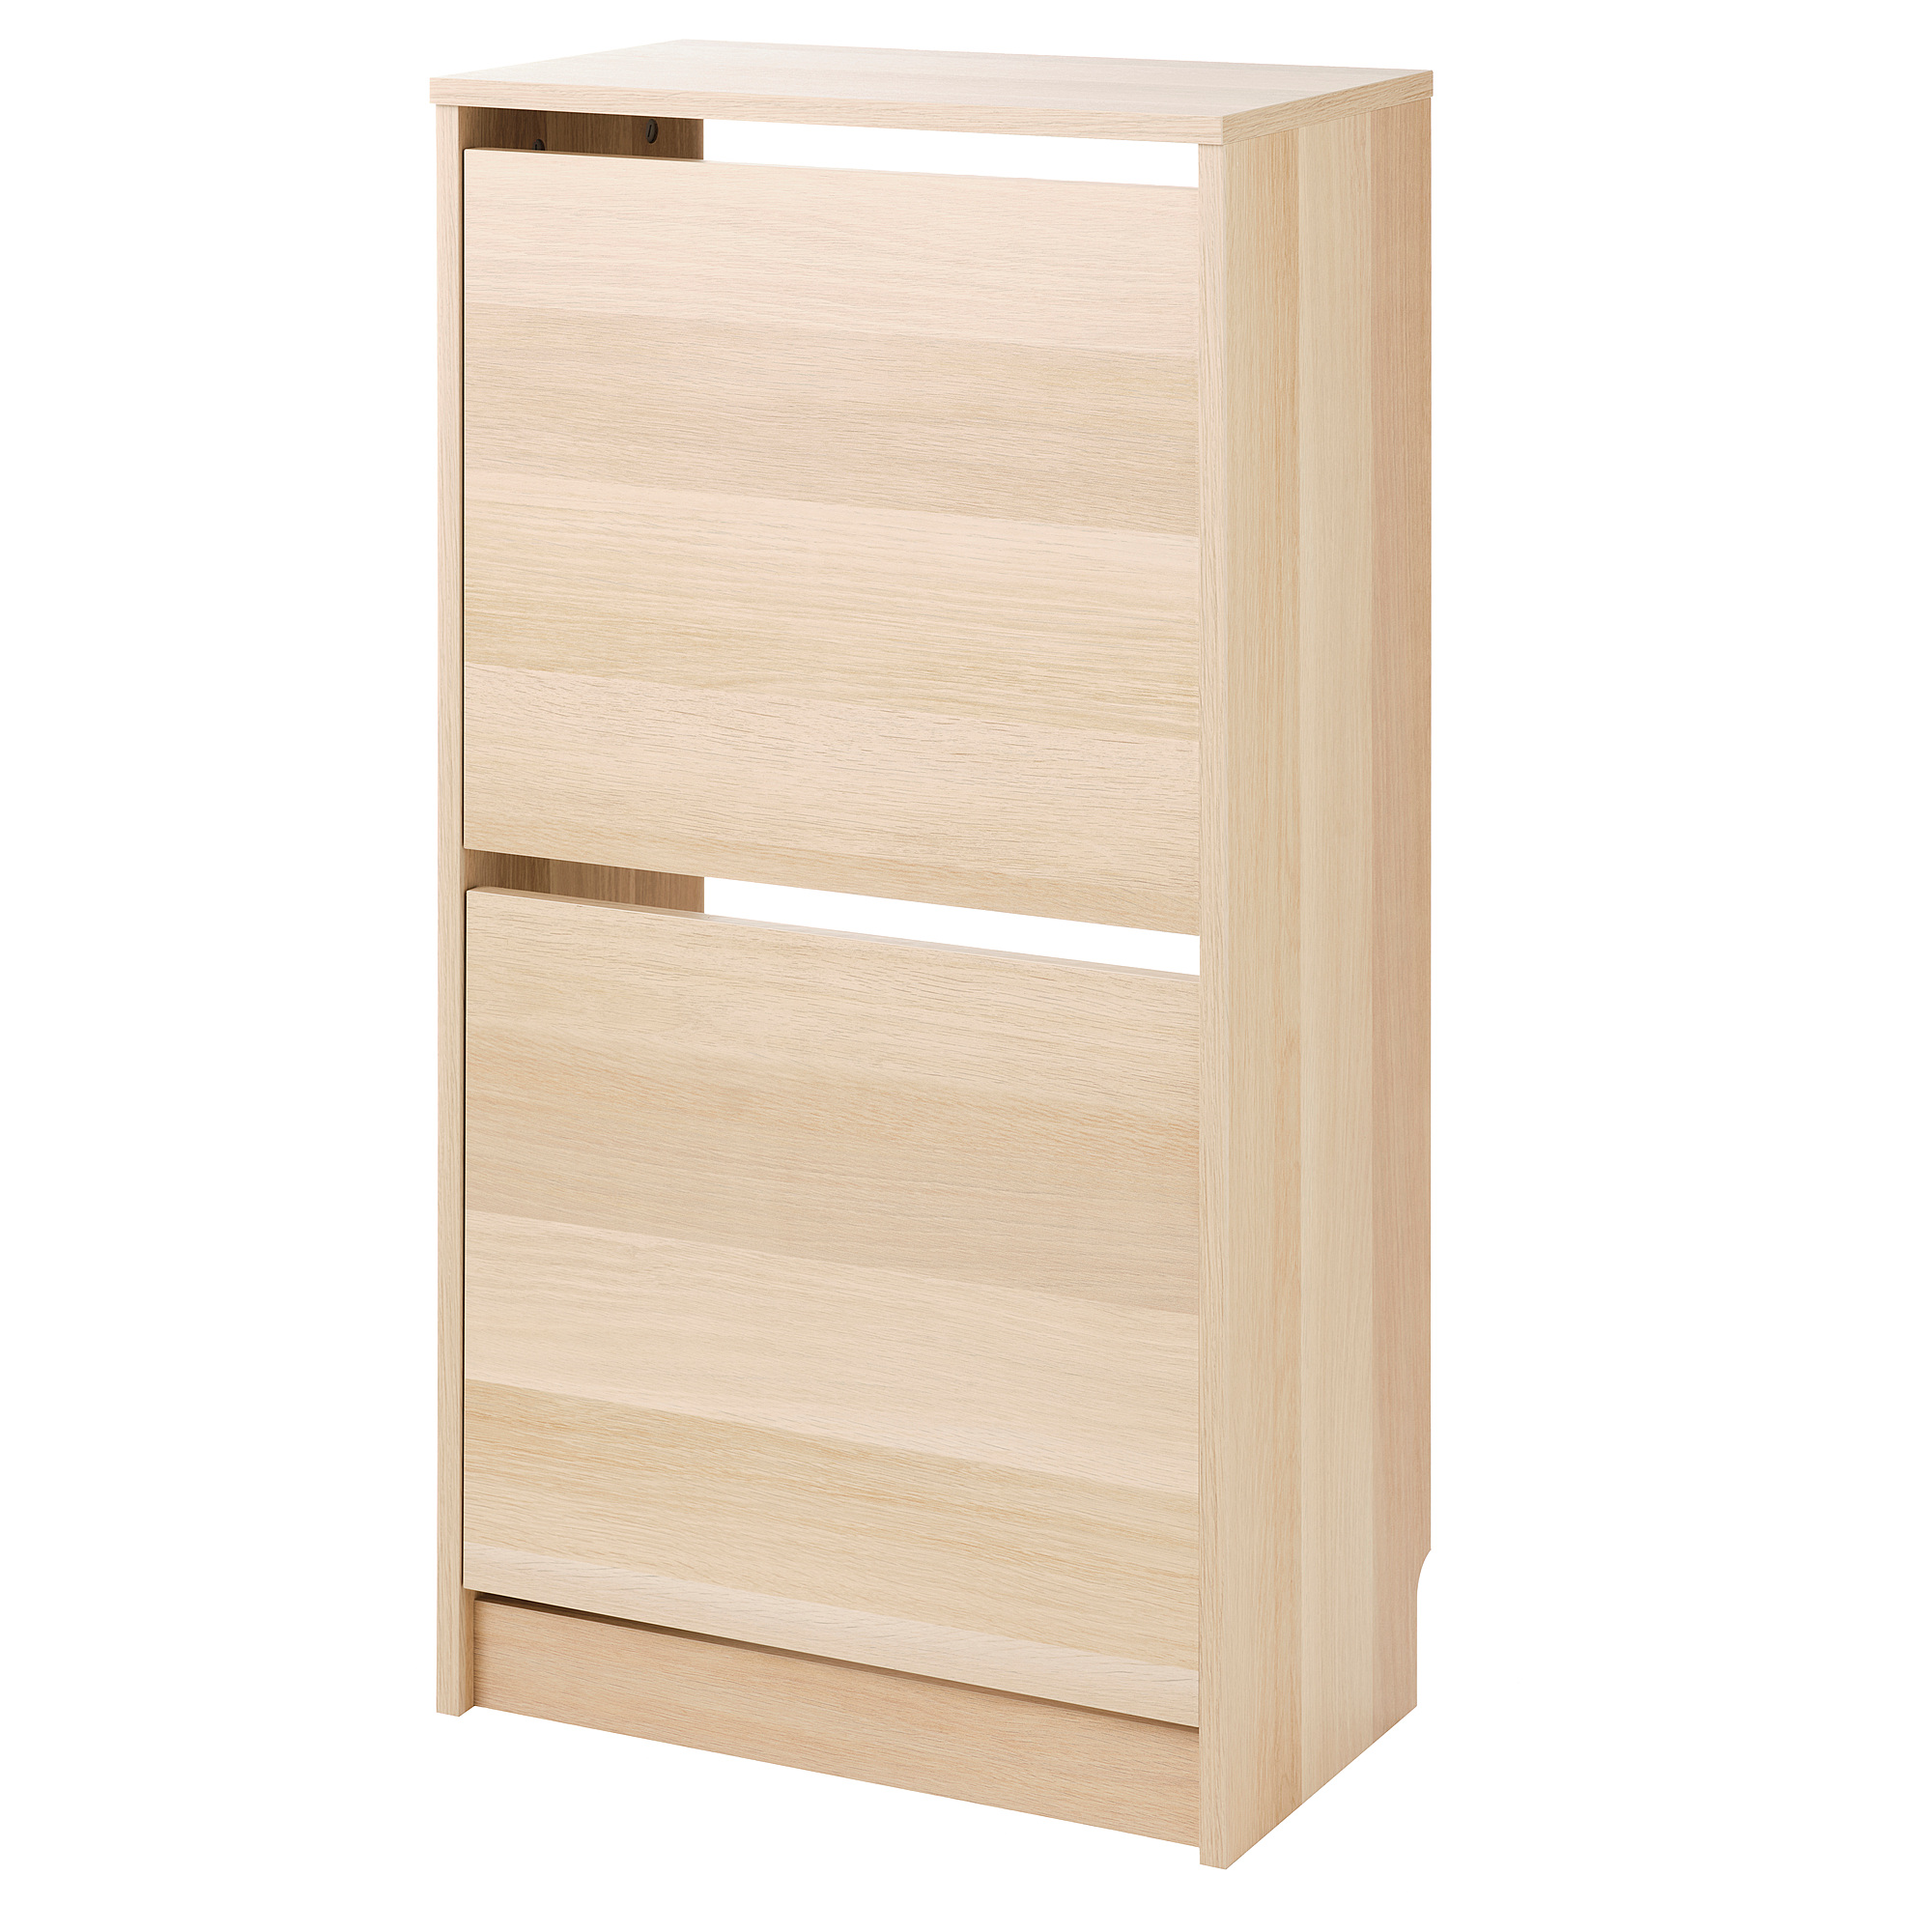 BISSA shoe cabinet with 2 compartments